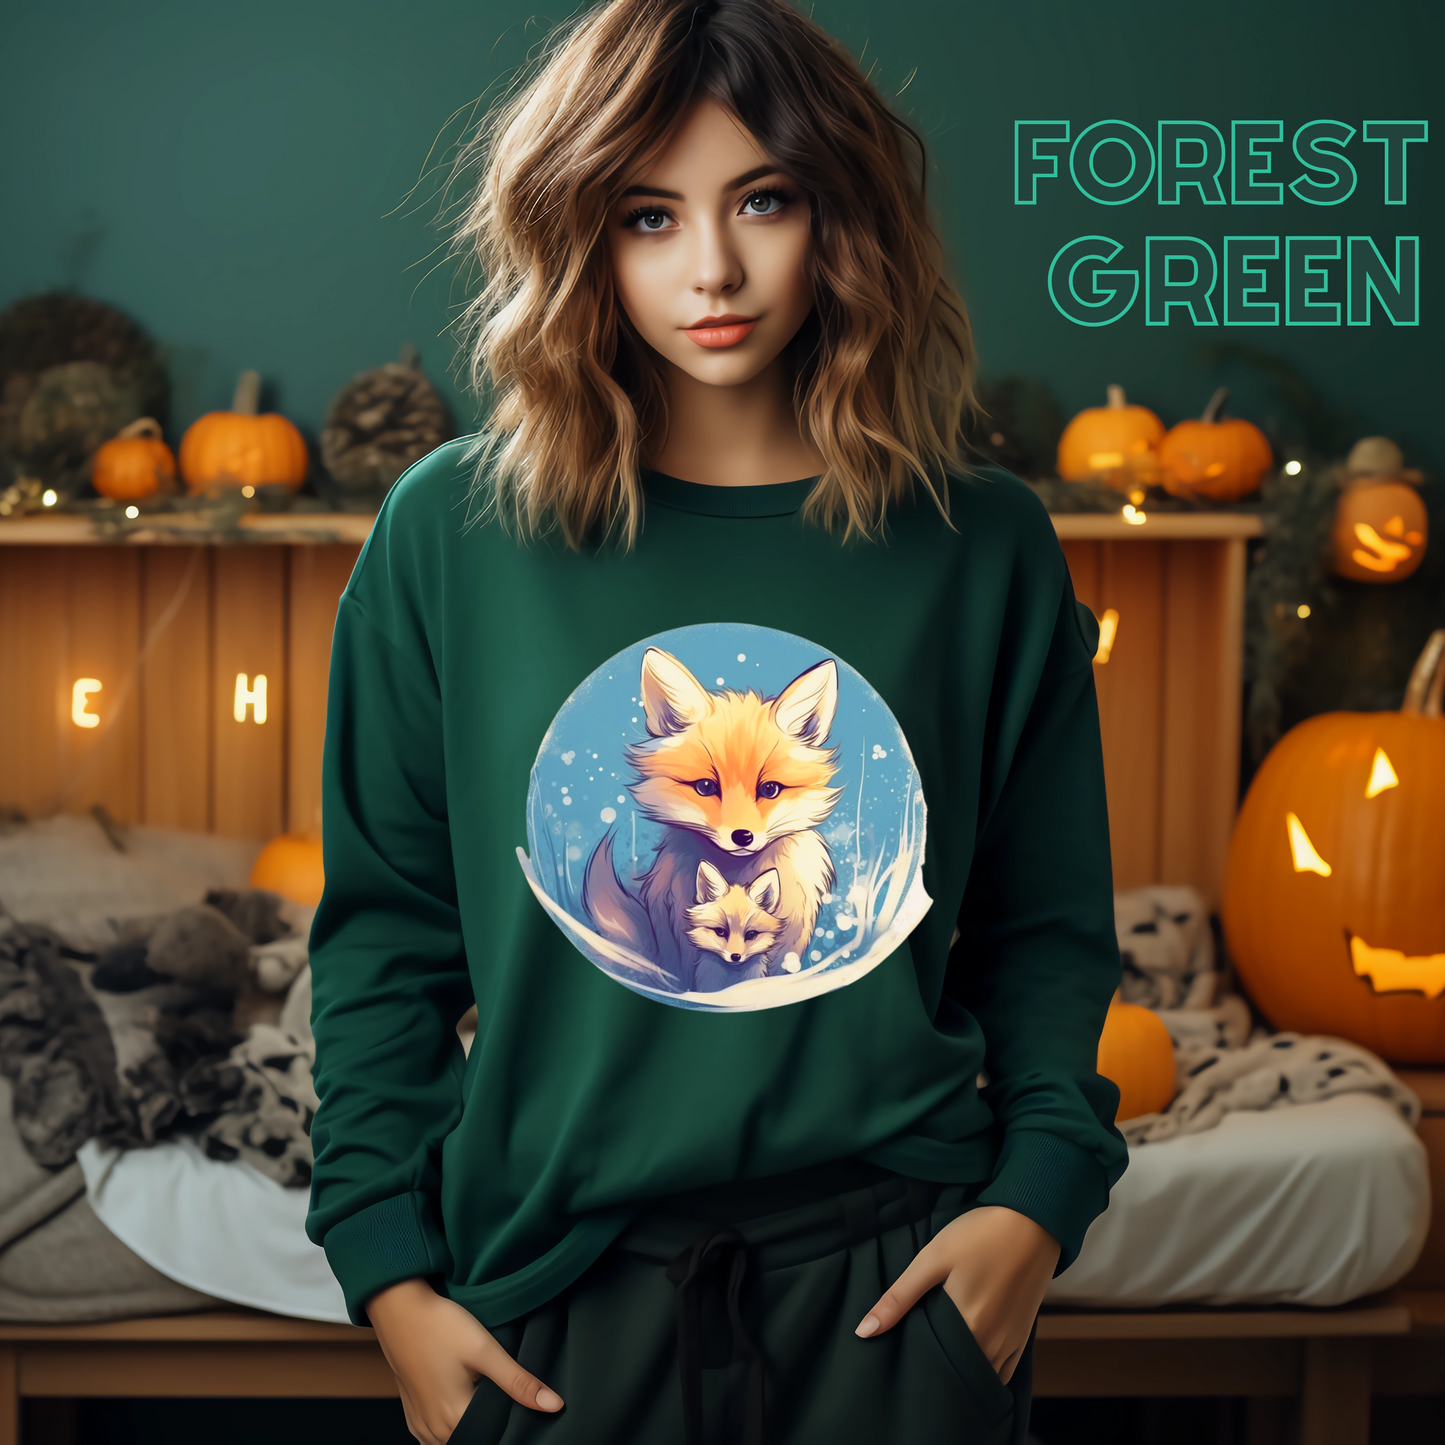 Vintage Forest Witch Aesthetic Sweatshirt - Cozy Fox Cottagecore Sweater with Mommy and Baby Fox Design Sweatshirt   